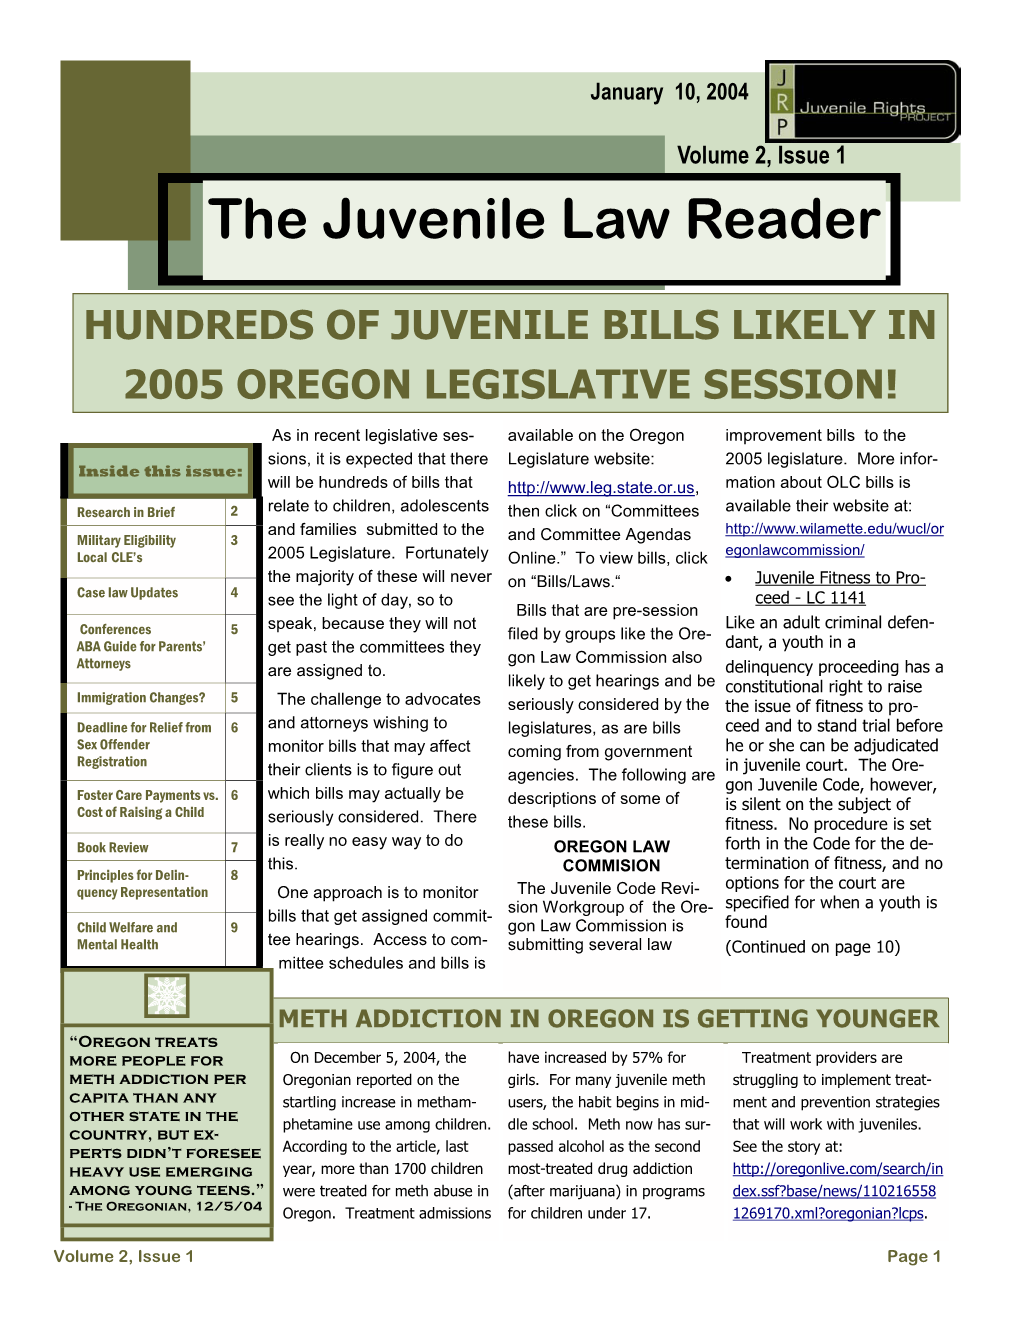 The Juvenile Law Reader